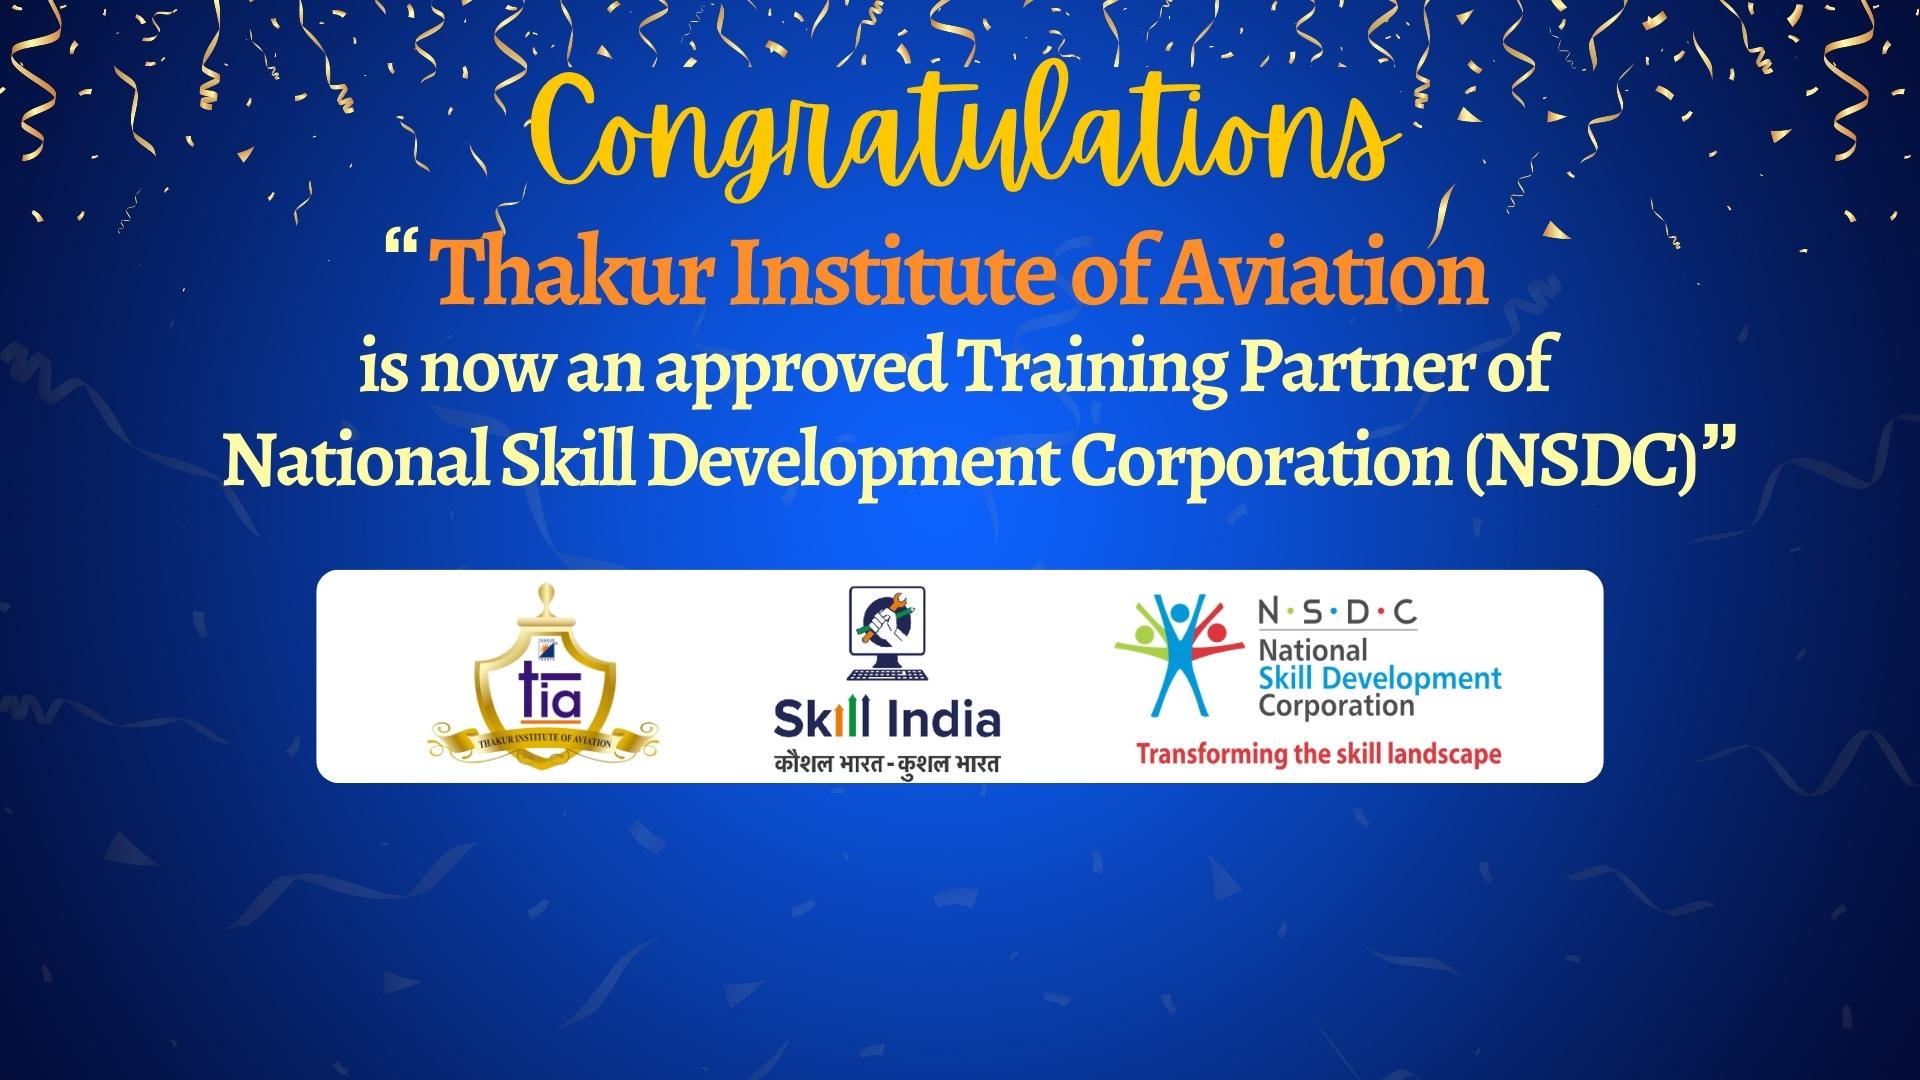 Thakur Institute of Aviation TIA is now an approved Training Partner of National Skill Development Corporation(NSDC)